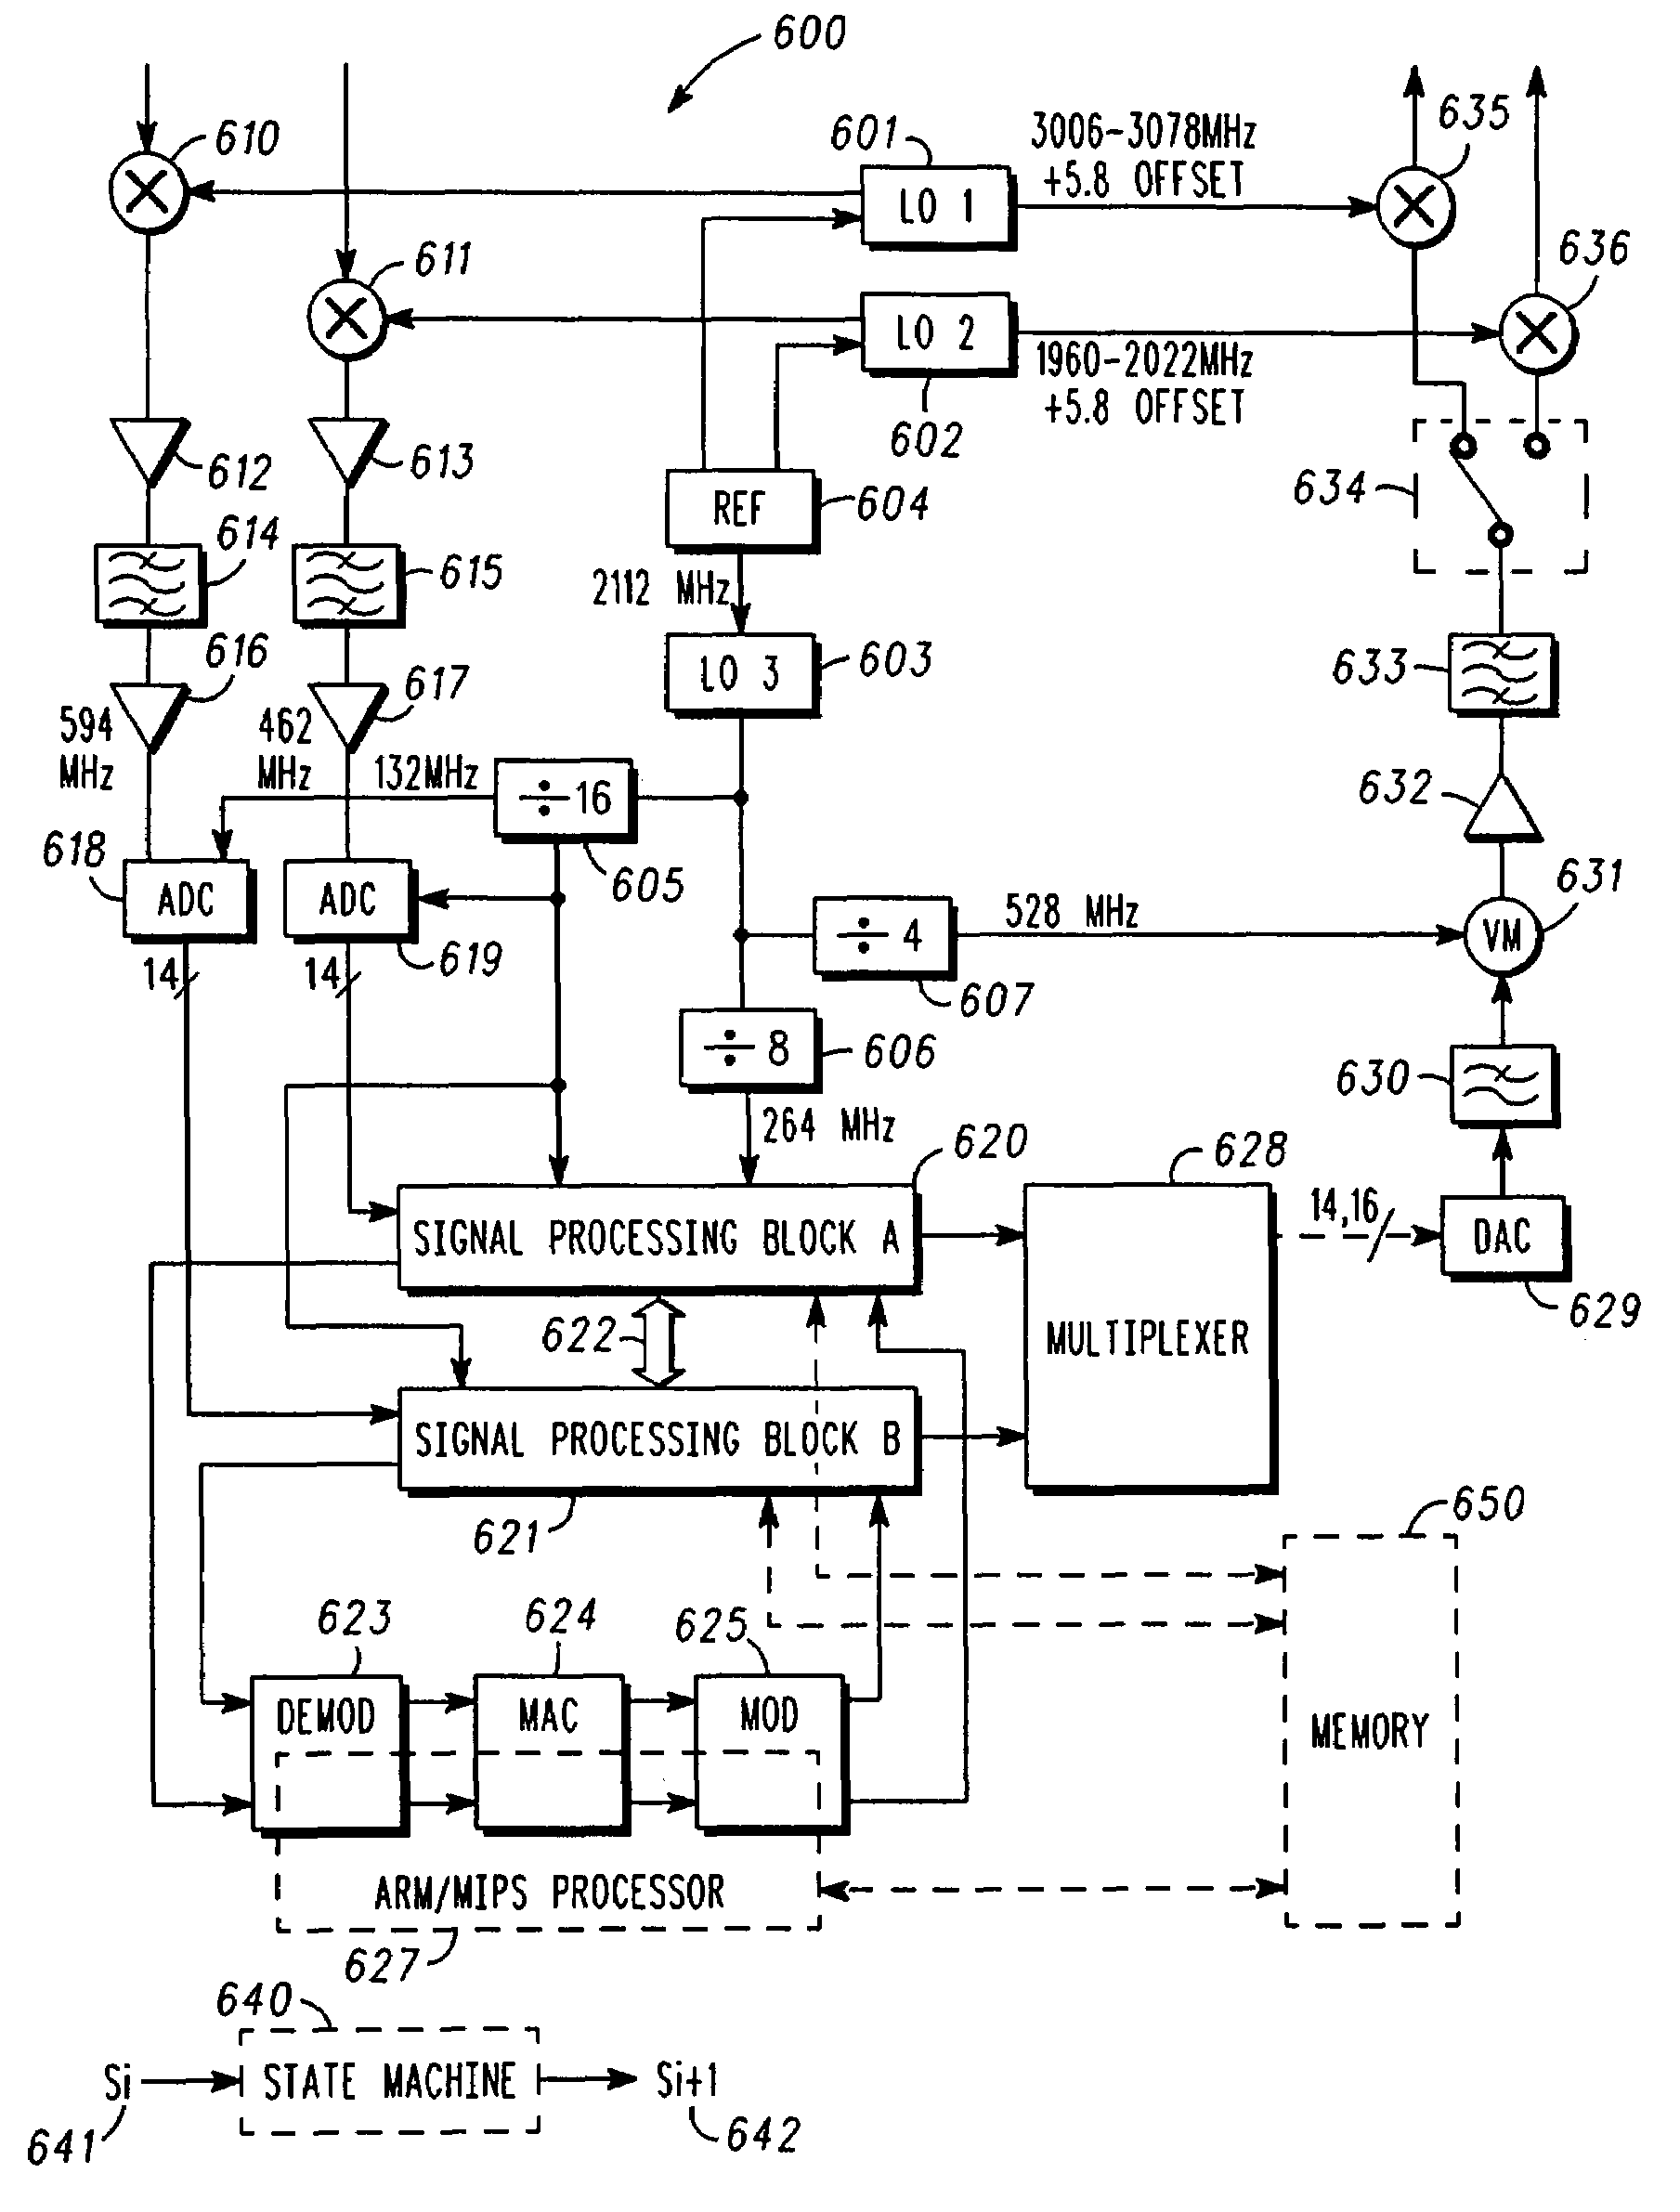 Physical layer repeater with selective use of higher layer functions based on network operating conditions